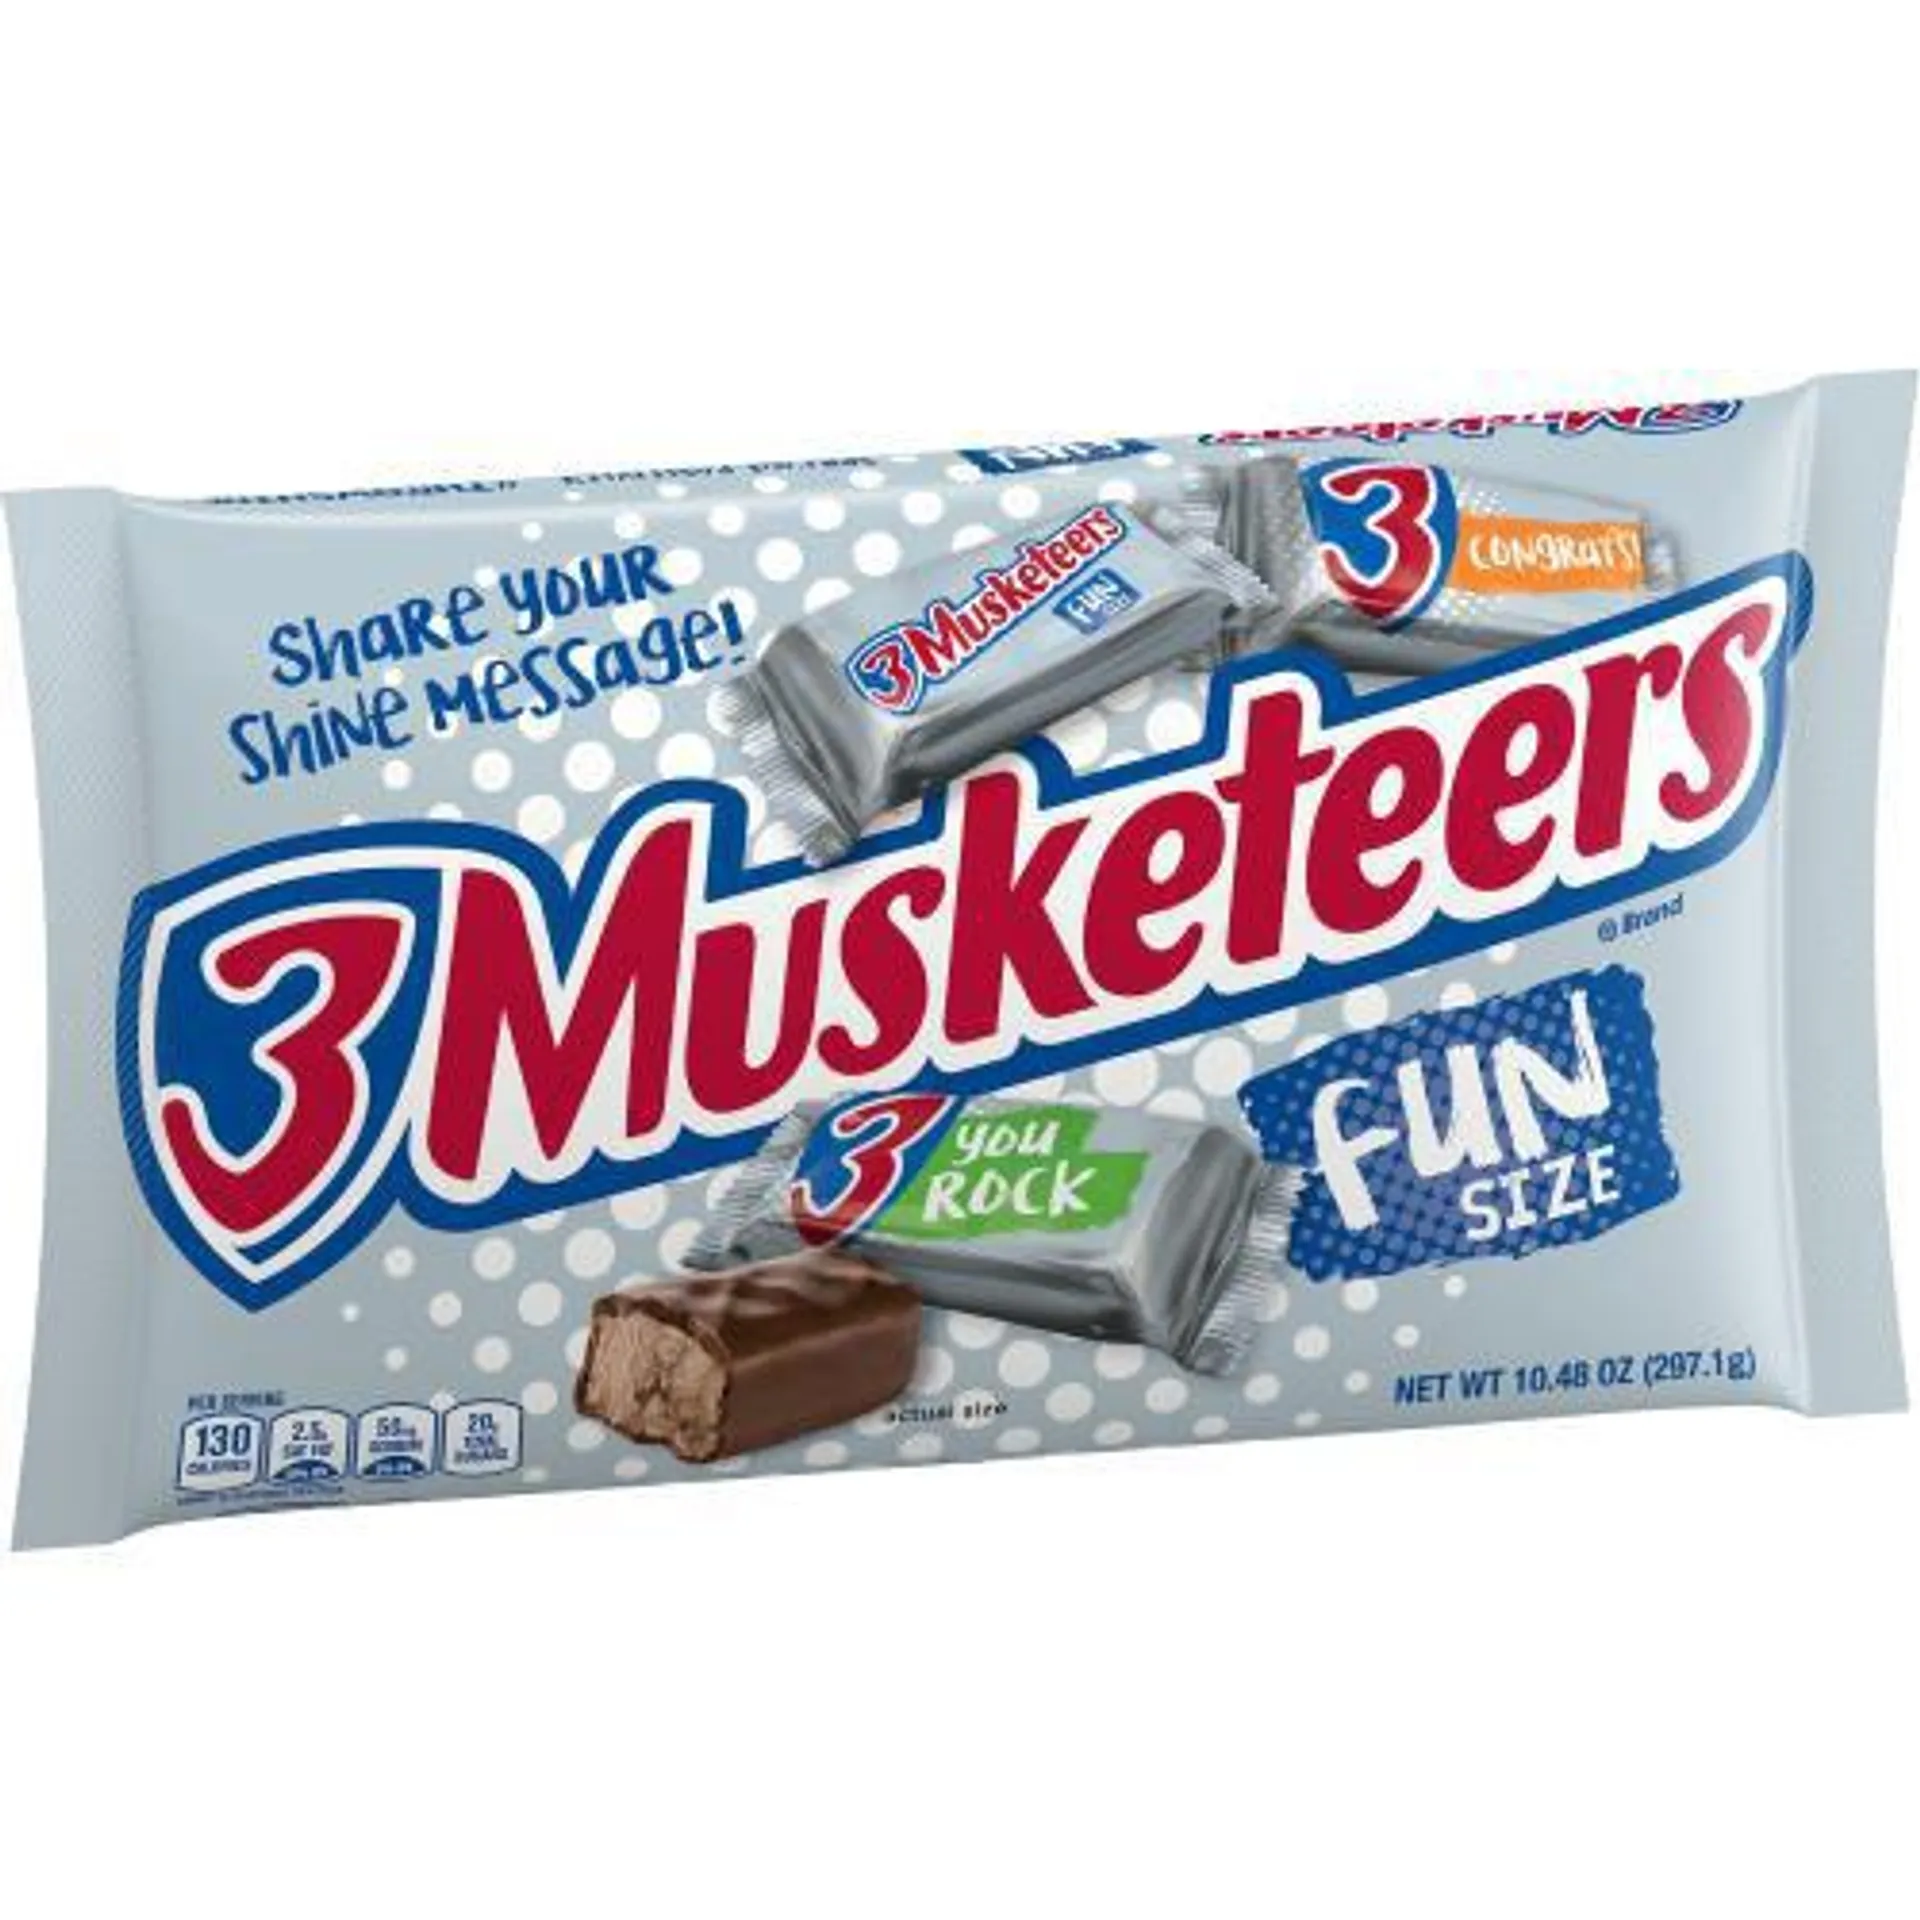 3 Musketeers Confectionery Bar, 10.48 Ounce